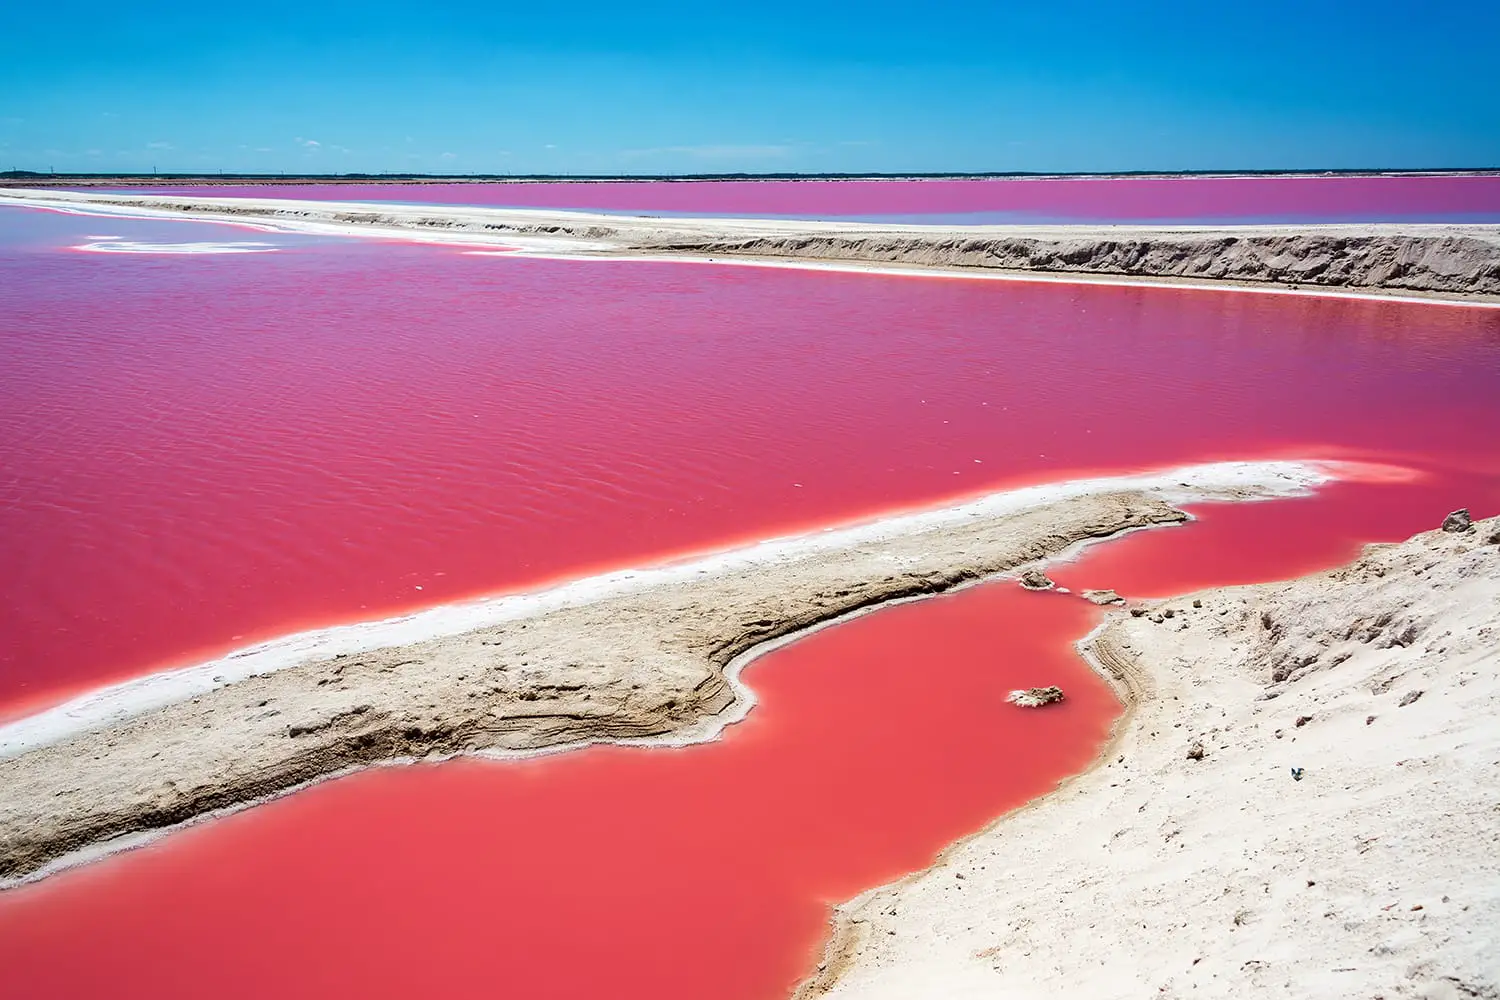 Striking red pool used in the production of salt near Rio Lagartos, Mexico